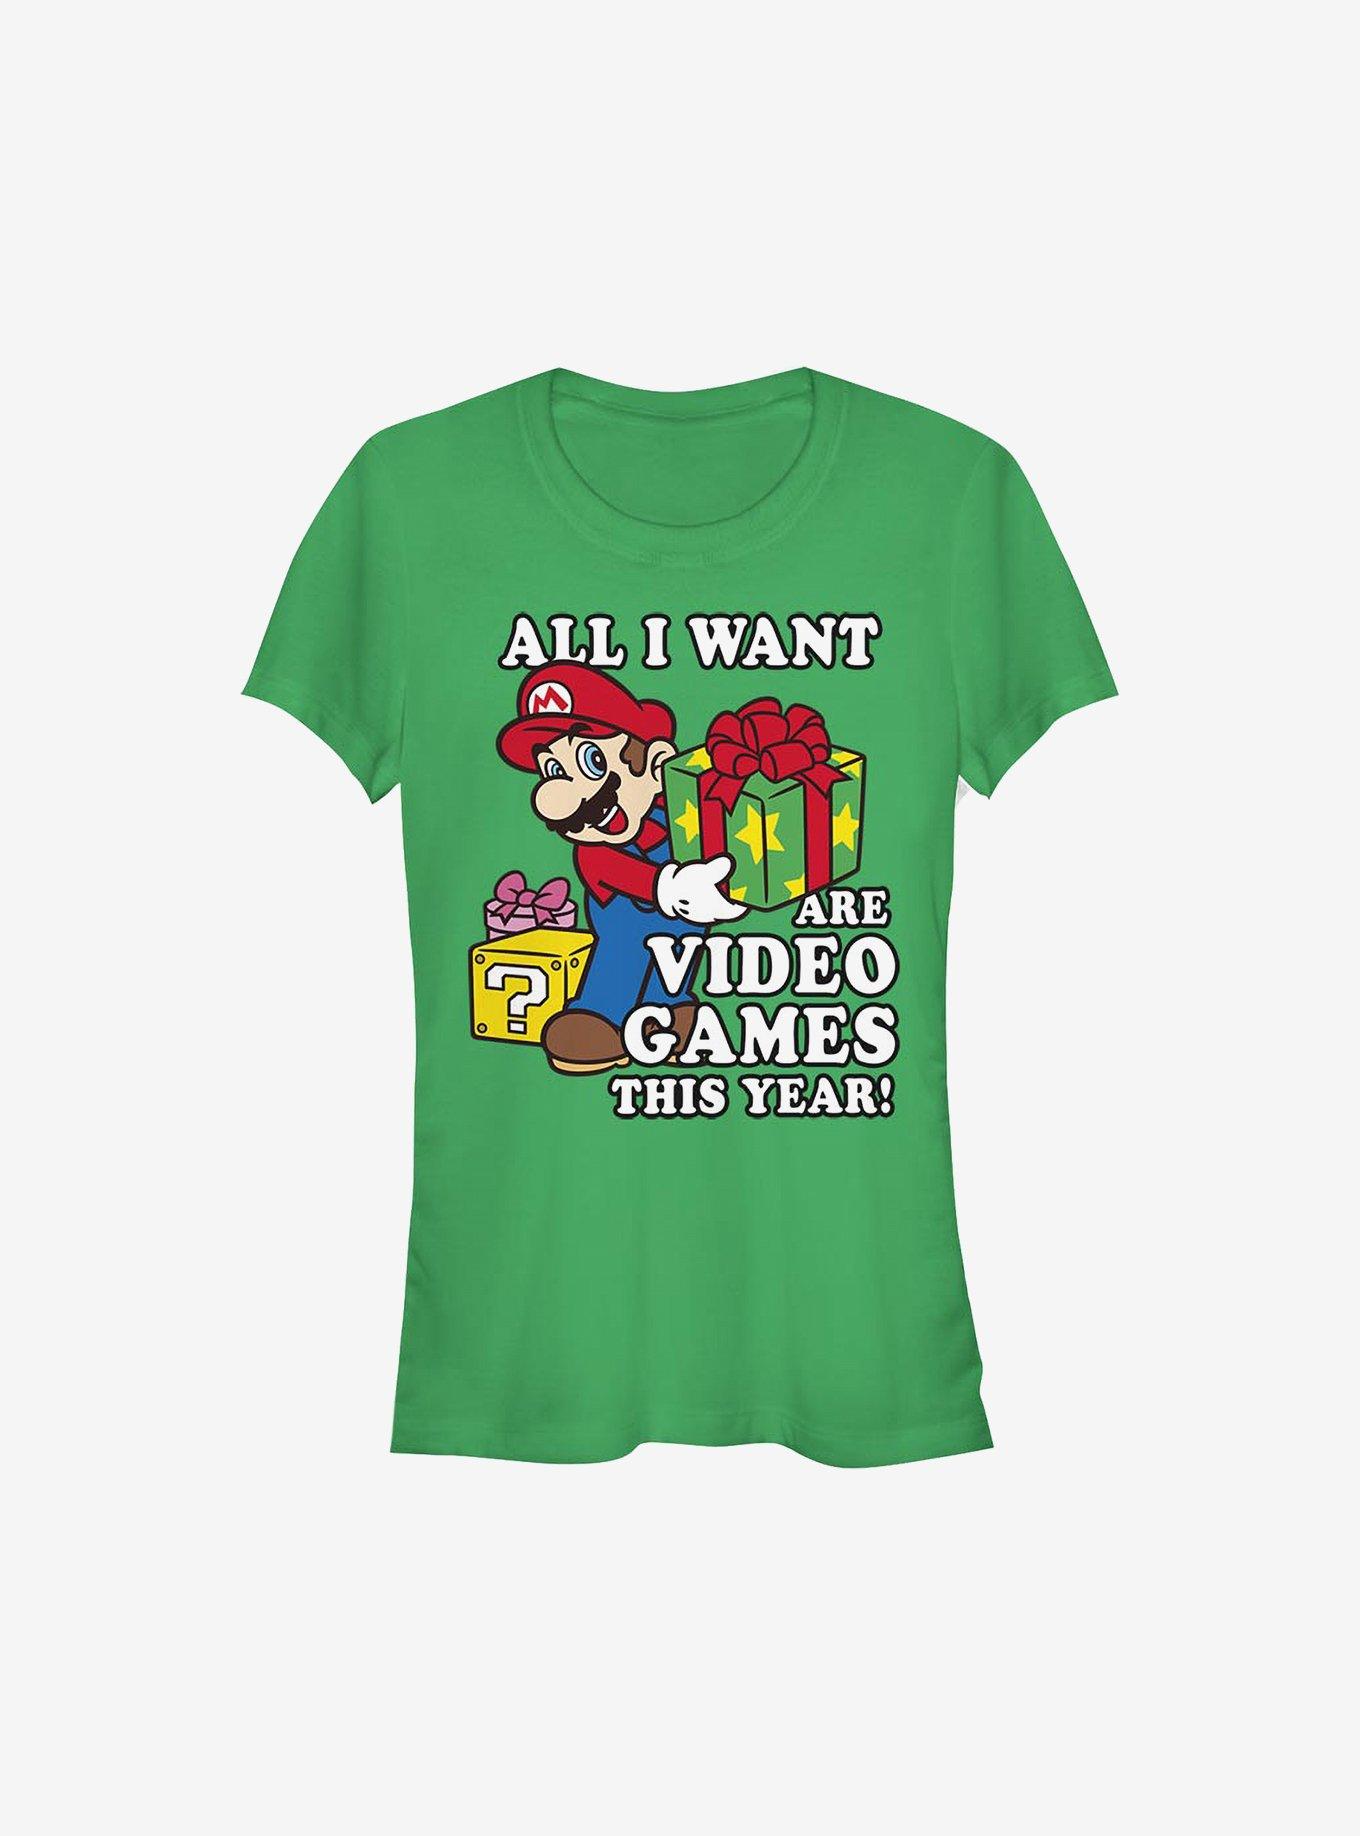 Super Mario All I Want Are Video Games Holiday Girls T-Shirt, KELLY, hi-res